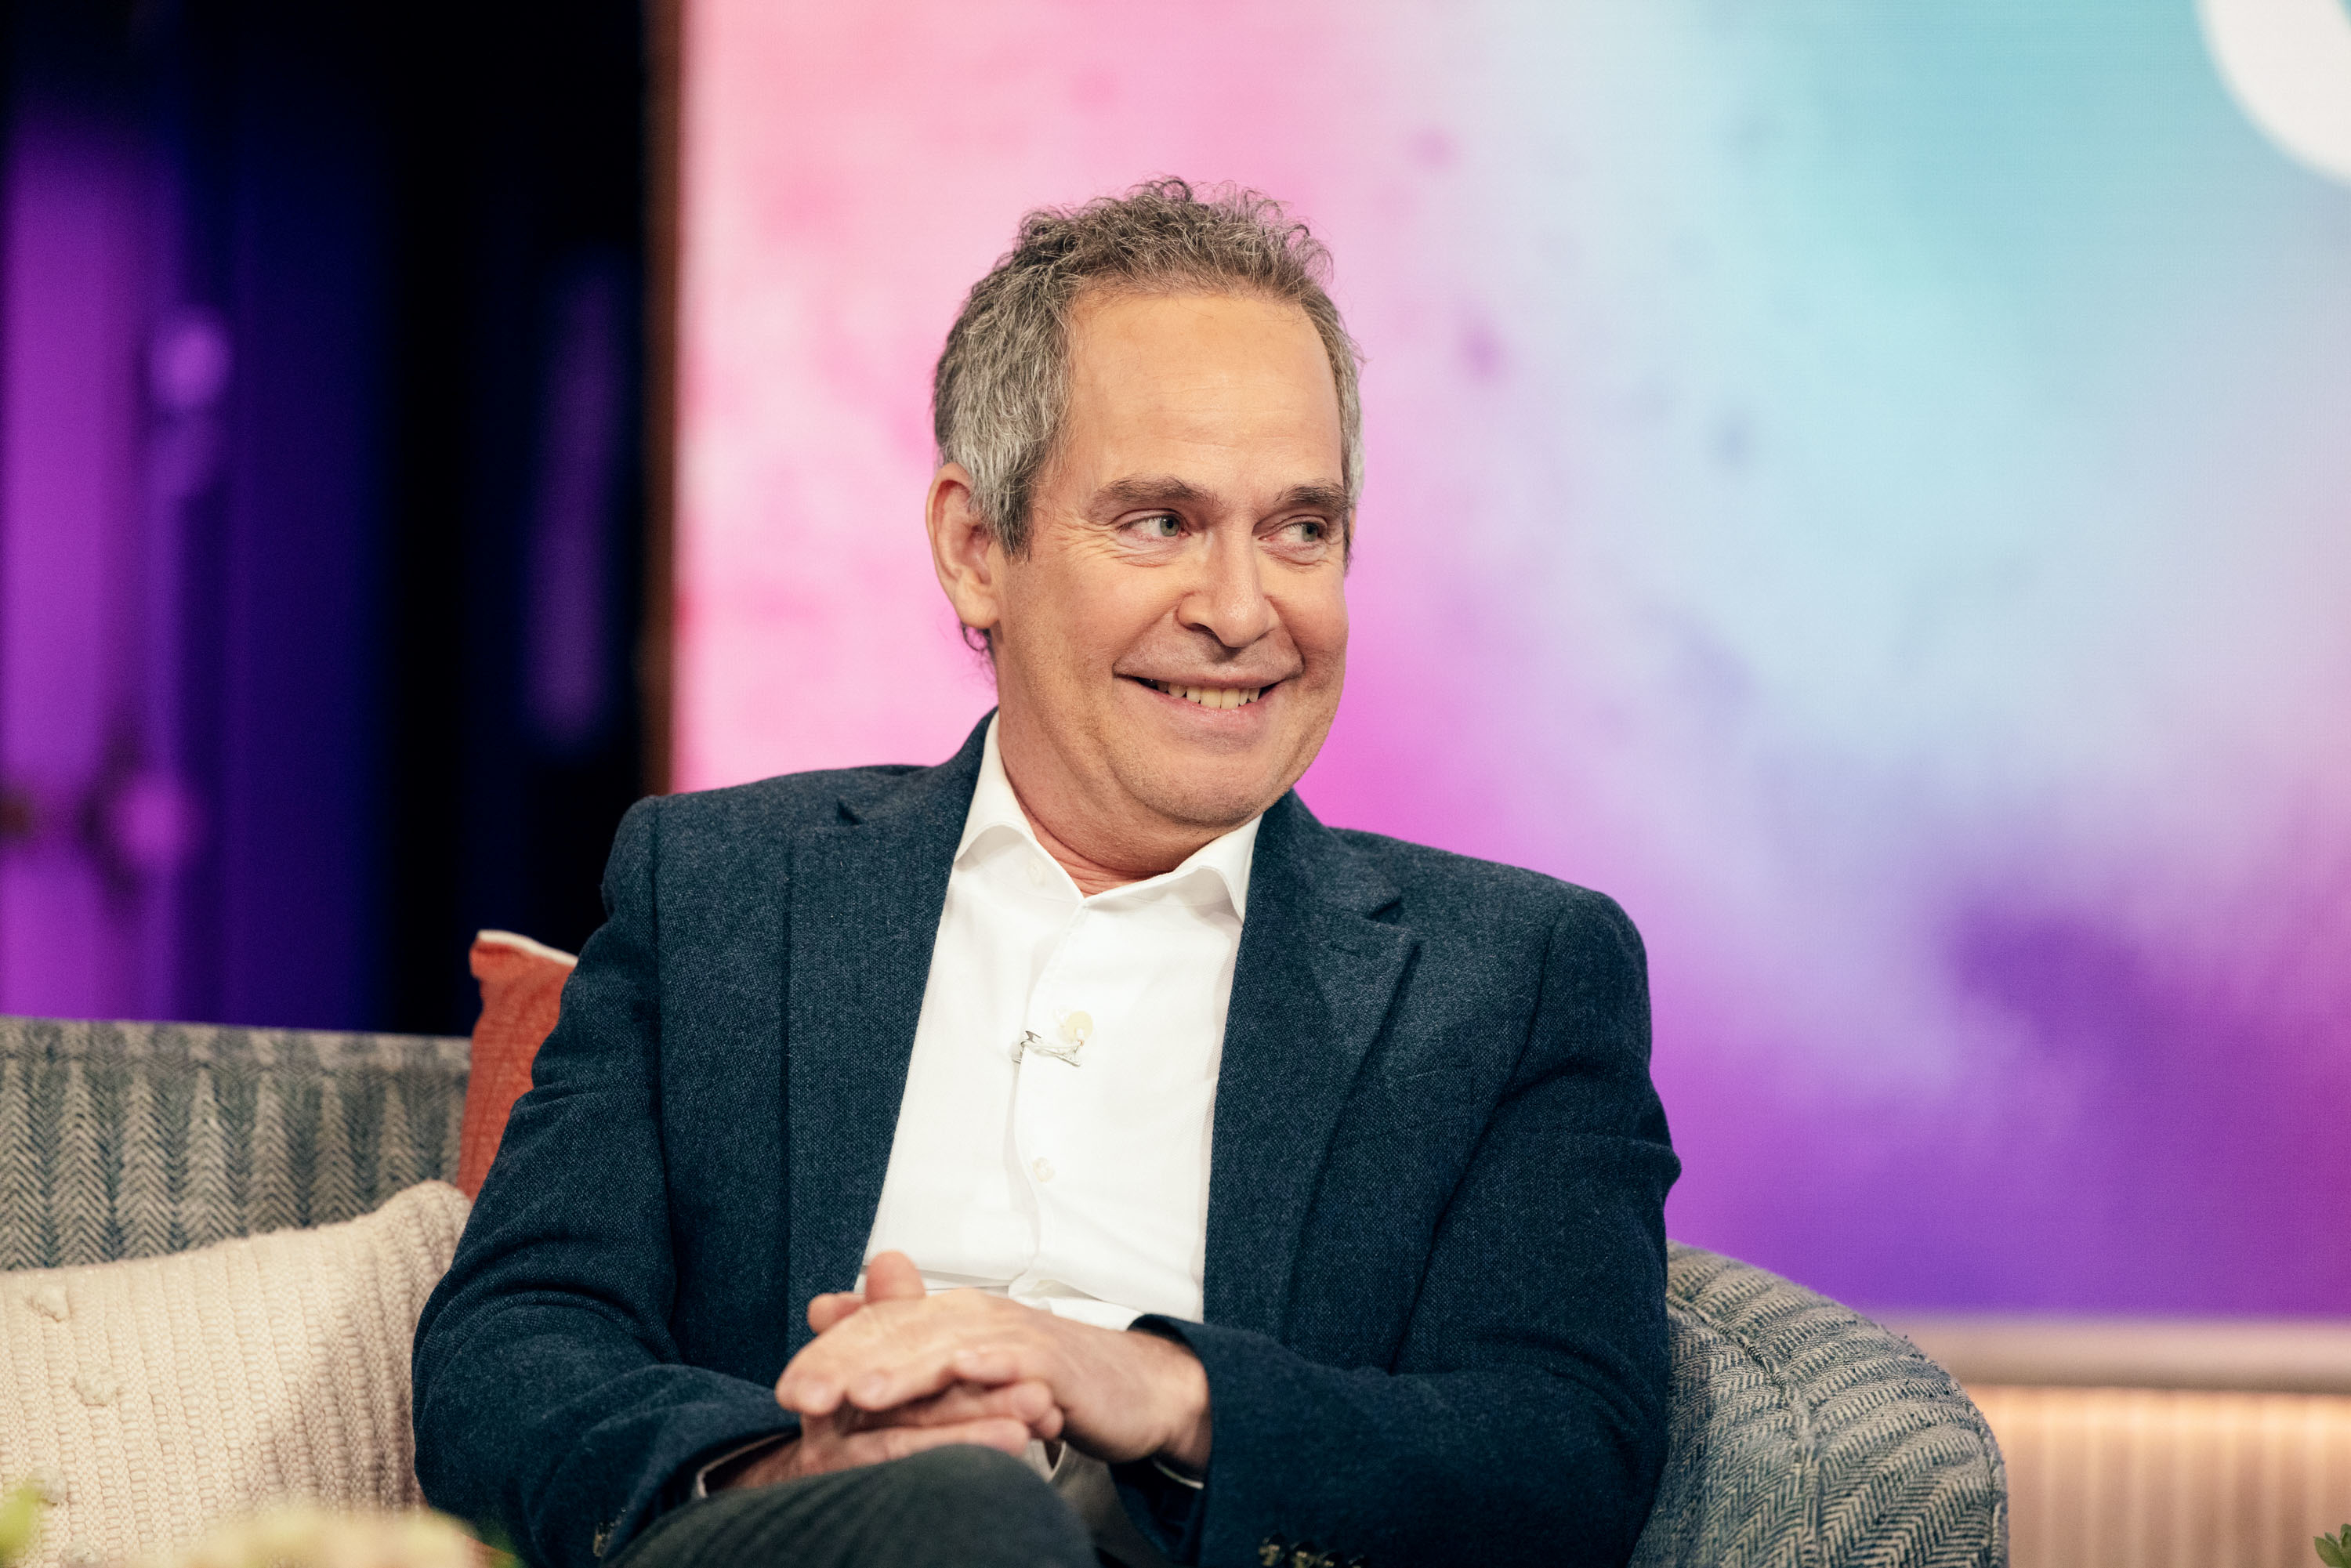 tom sitting, wearing a blazer with a shirt, smiling in an interview setting